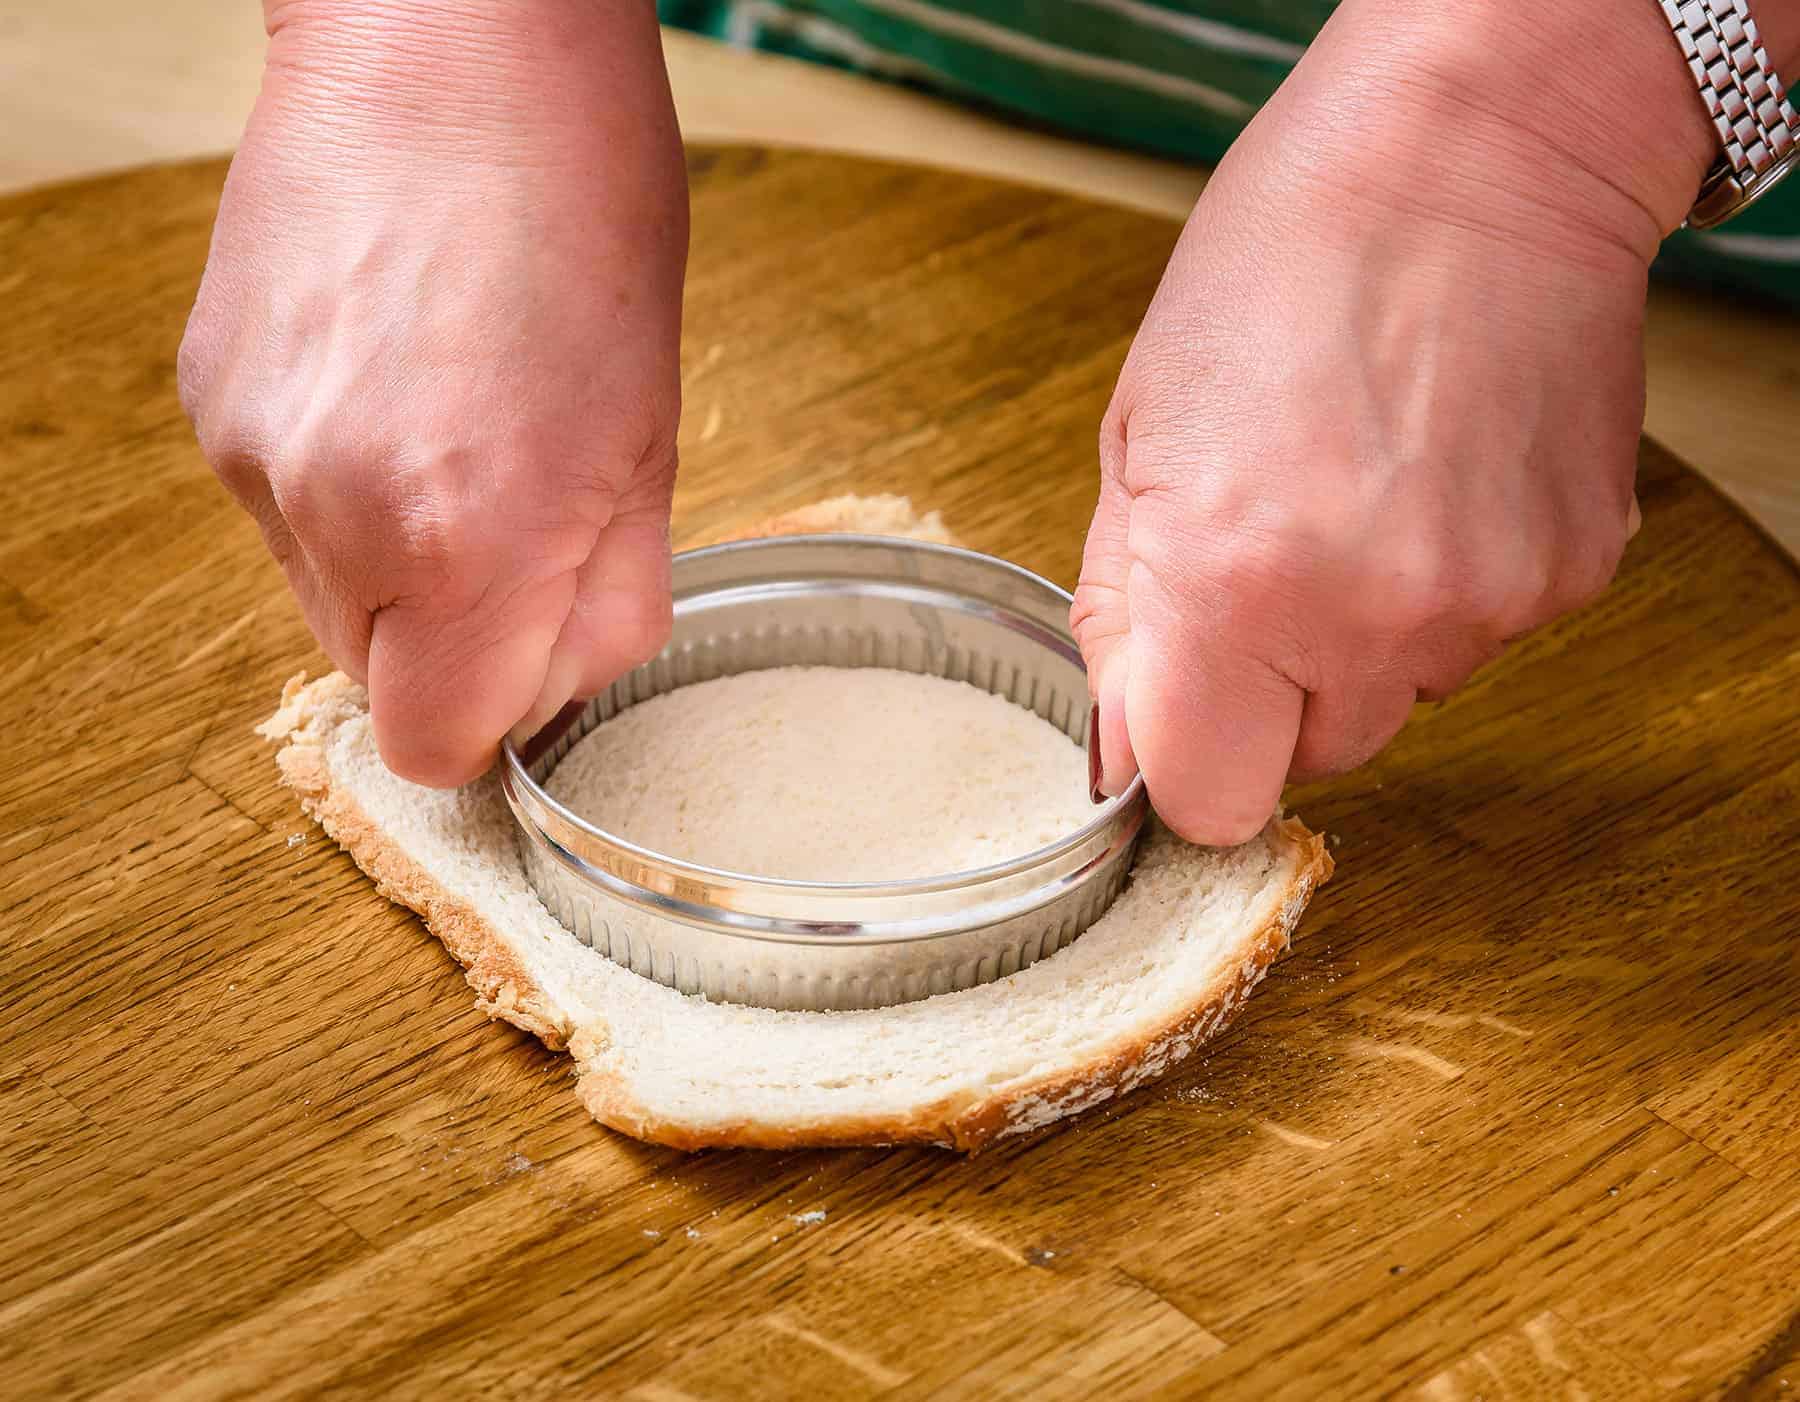 Cutting bread with a biscuit cutter.